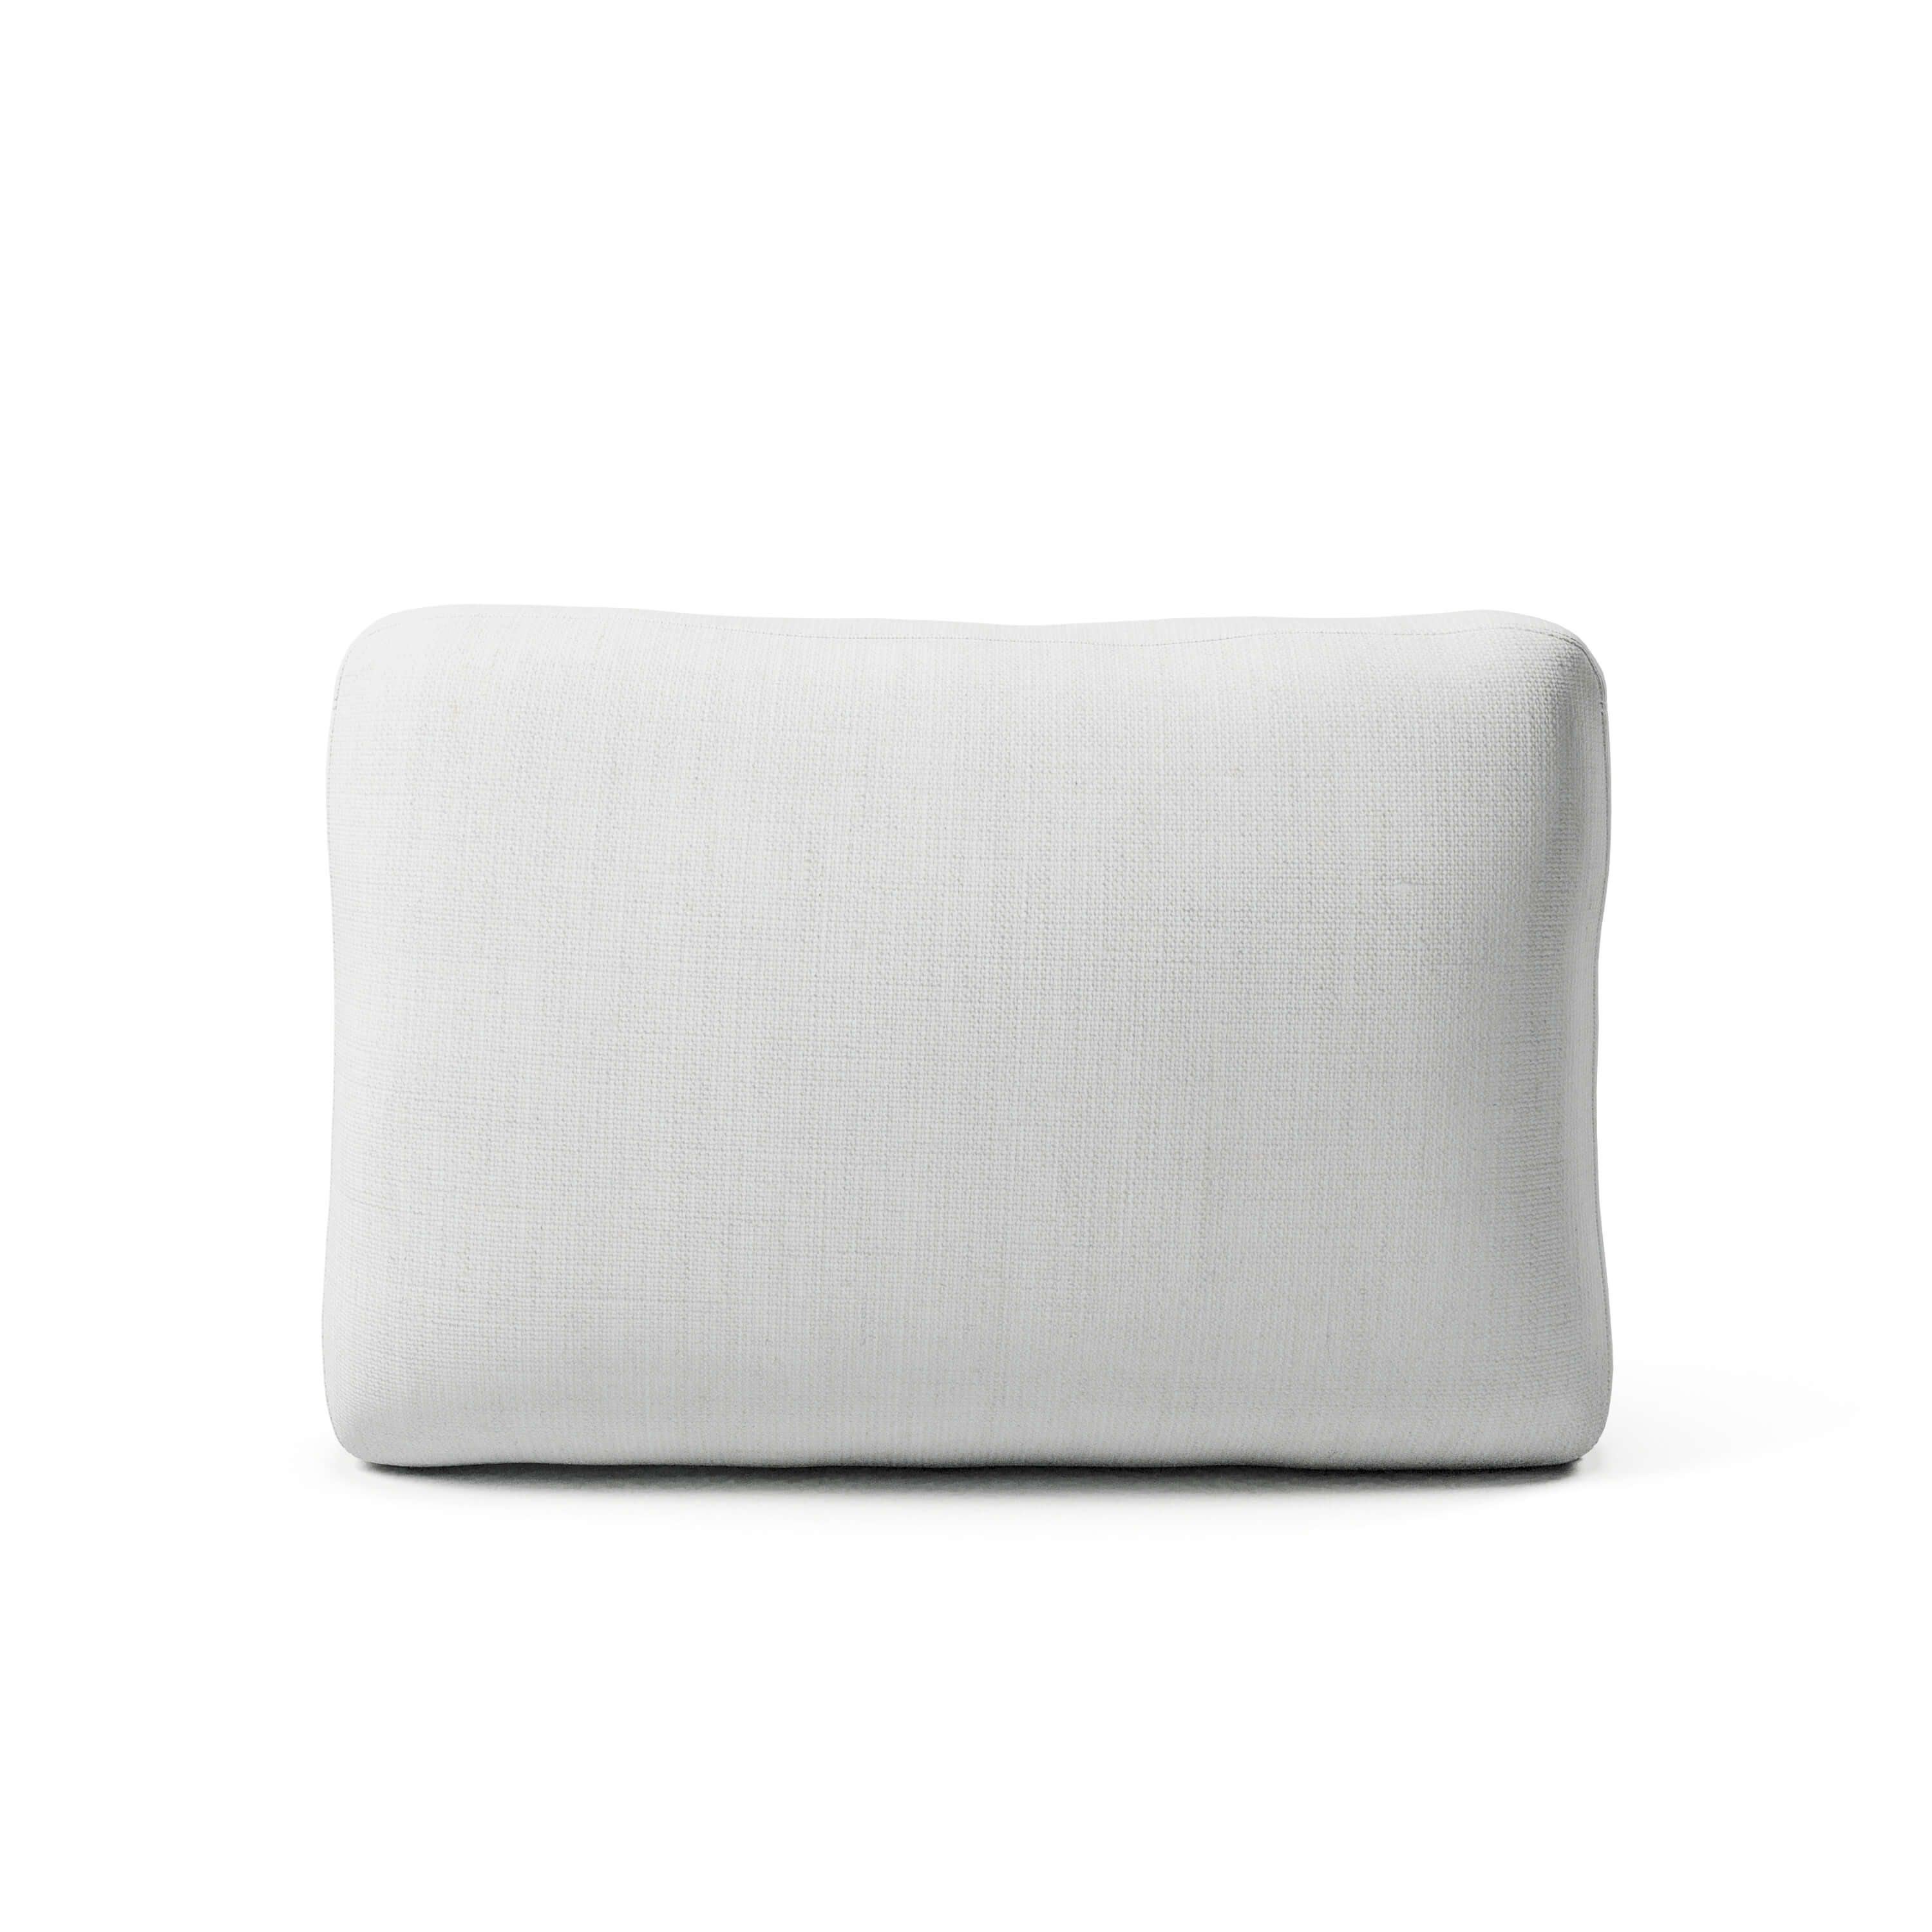 Comfy Sofa - Side Cushion Slipcover Replacement